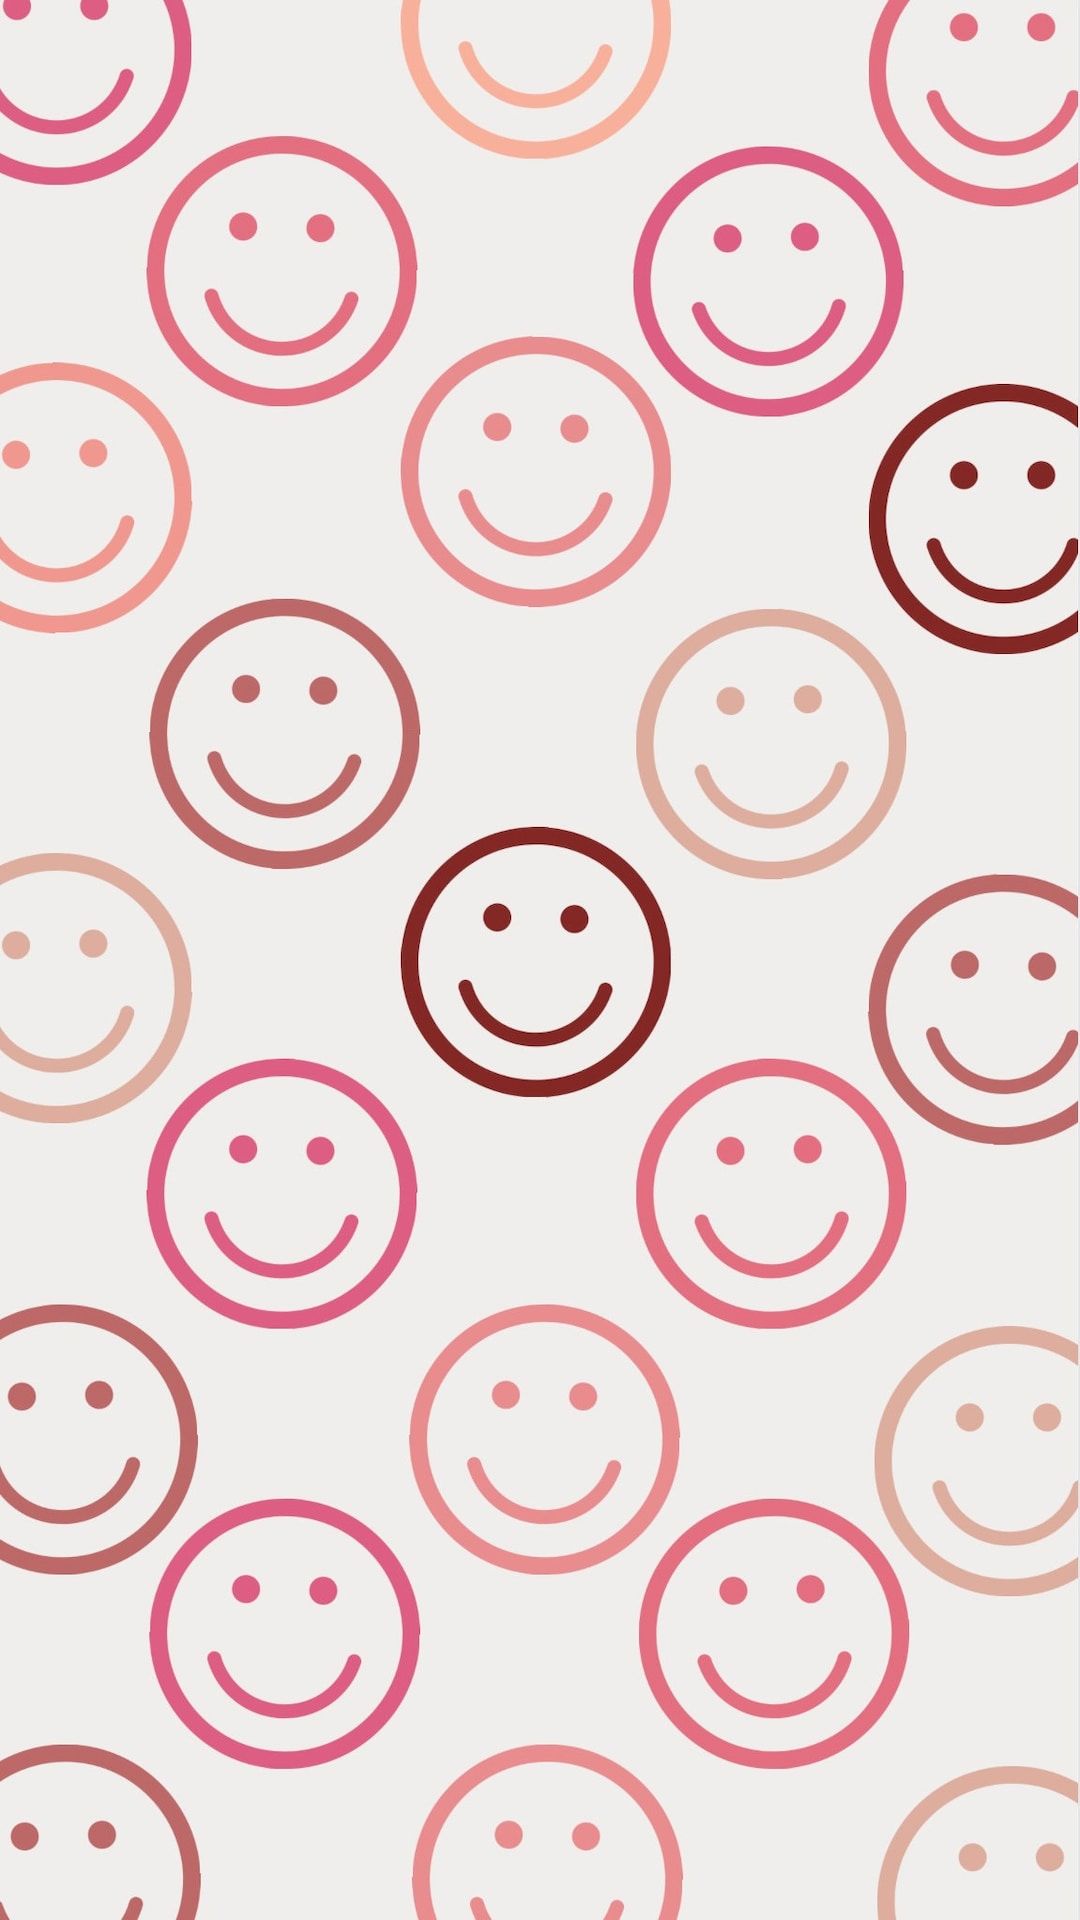 IPhone wallpaper with a pattern of smiling faces in pink and red hues - Smiley